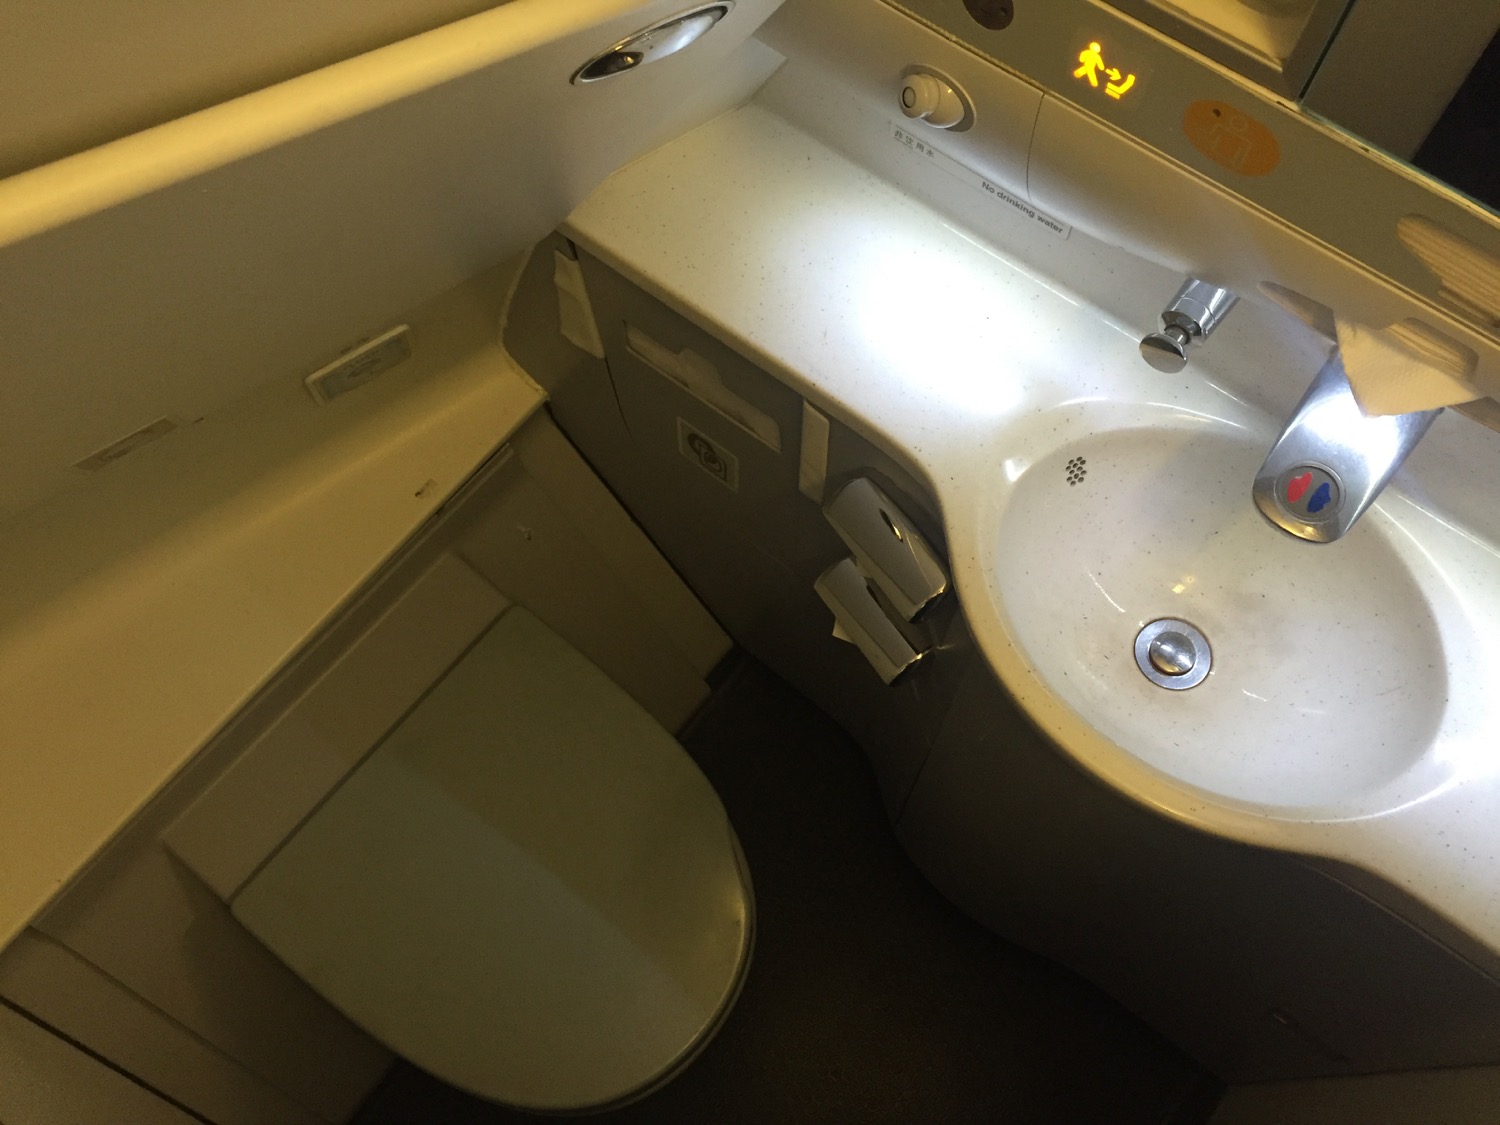 a sink and toilet in an airplane